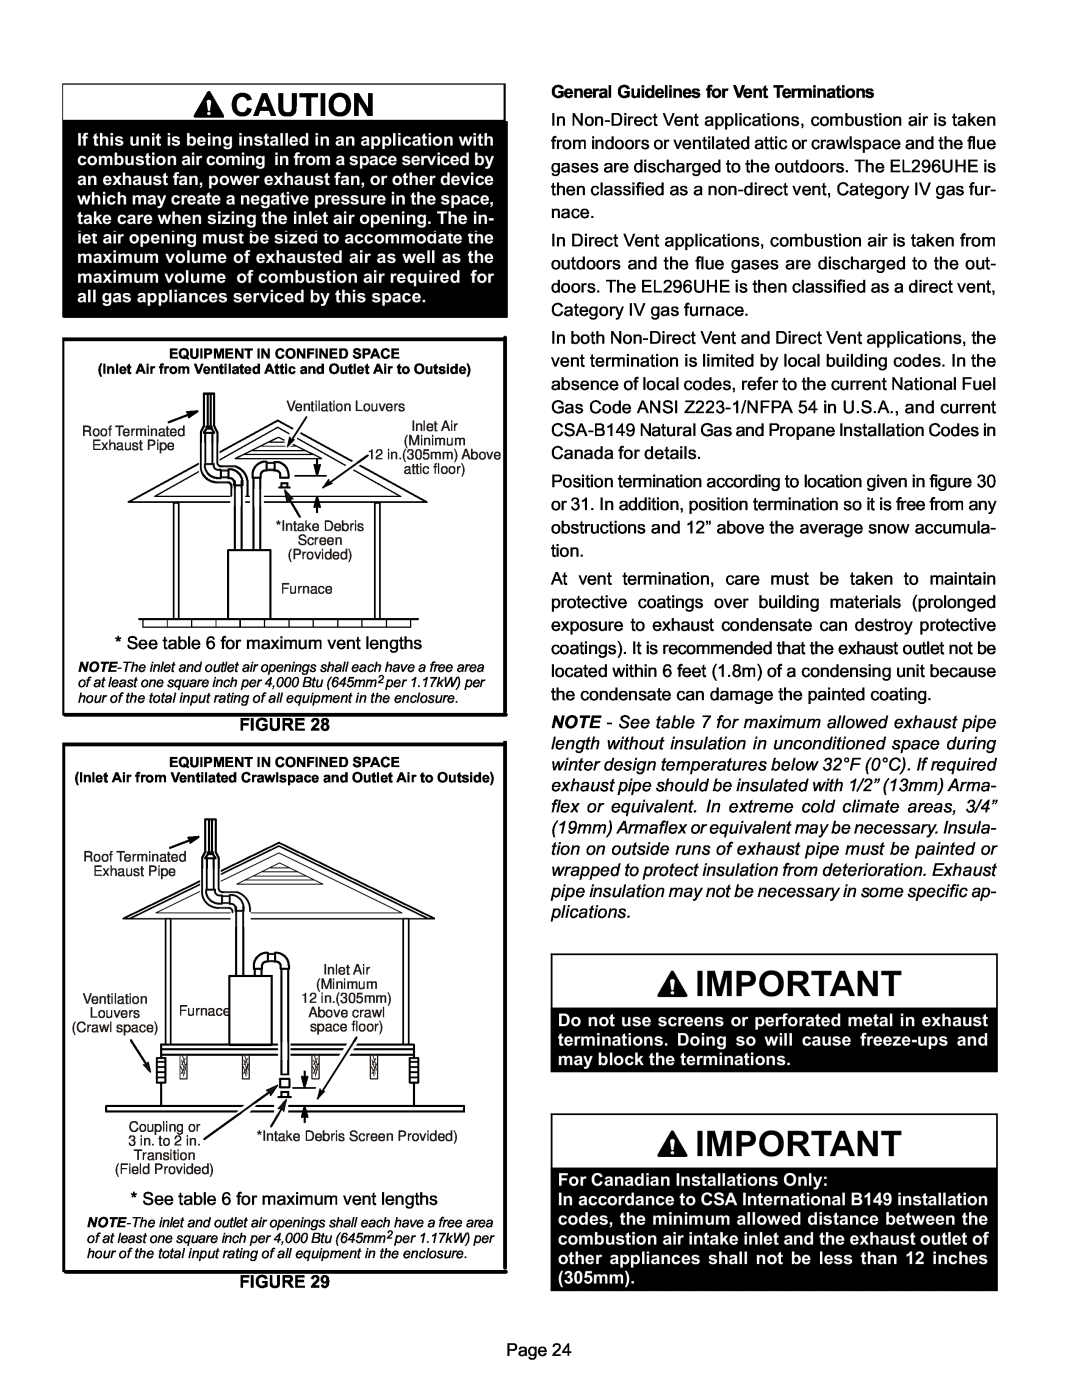 Lennox International Inc EL296UHE General Guidelines for Vent Terminations, For Canadian Installations Only 